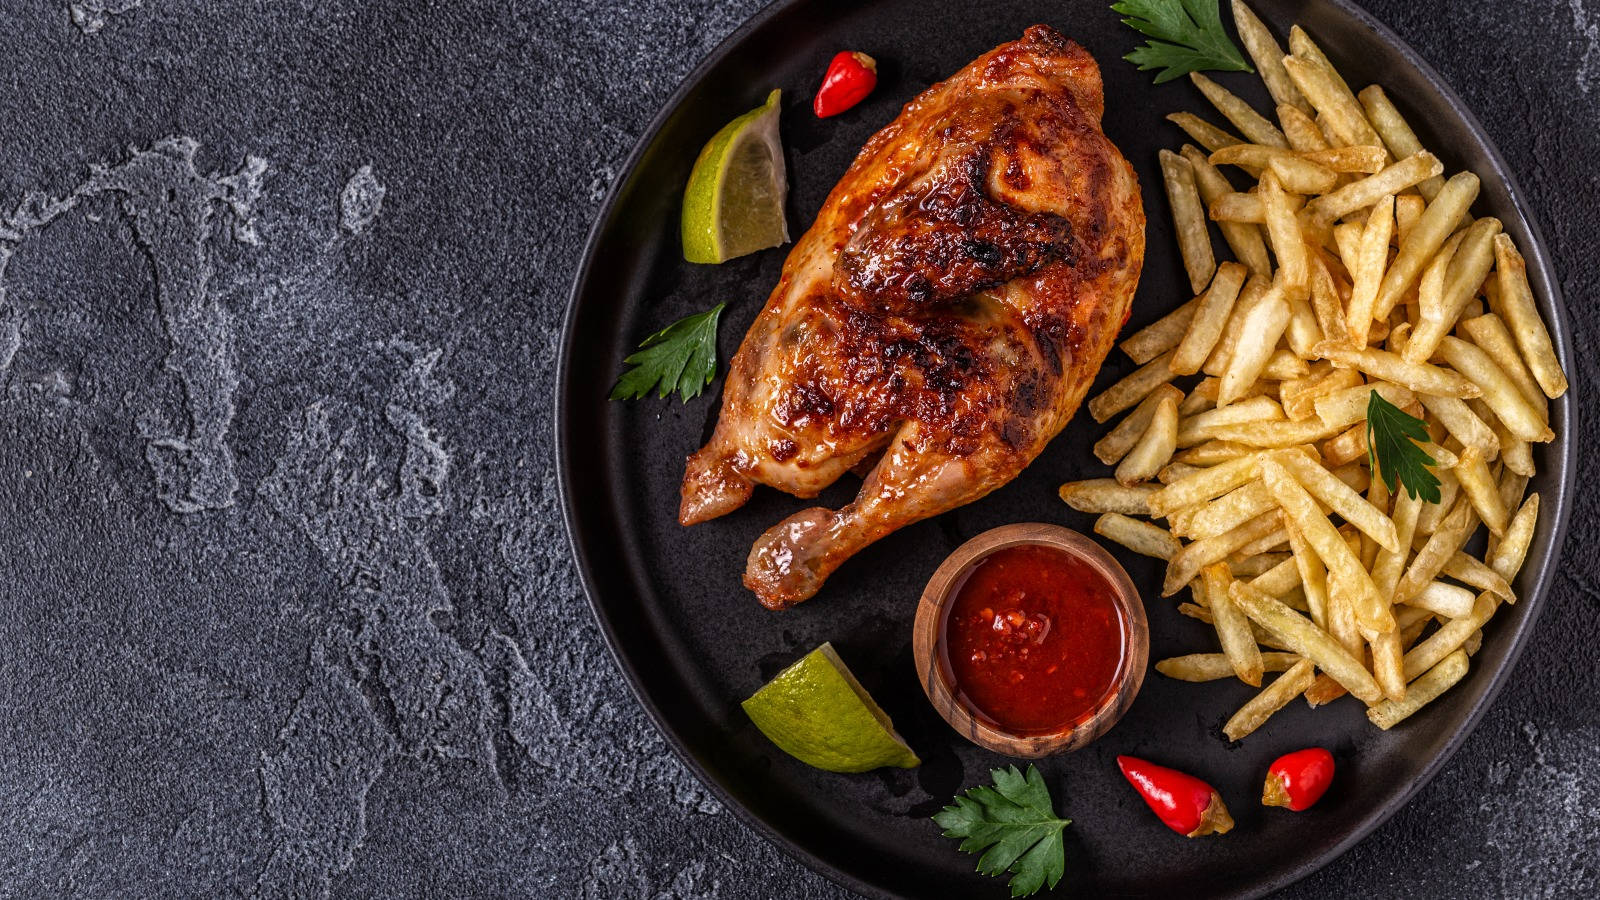 Peri Peri Chicken With Fries Side Dish Wallpaper